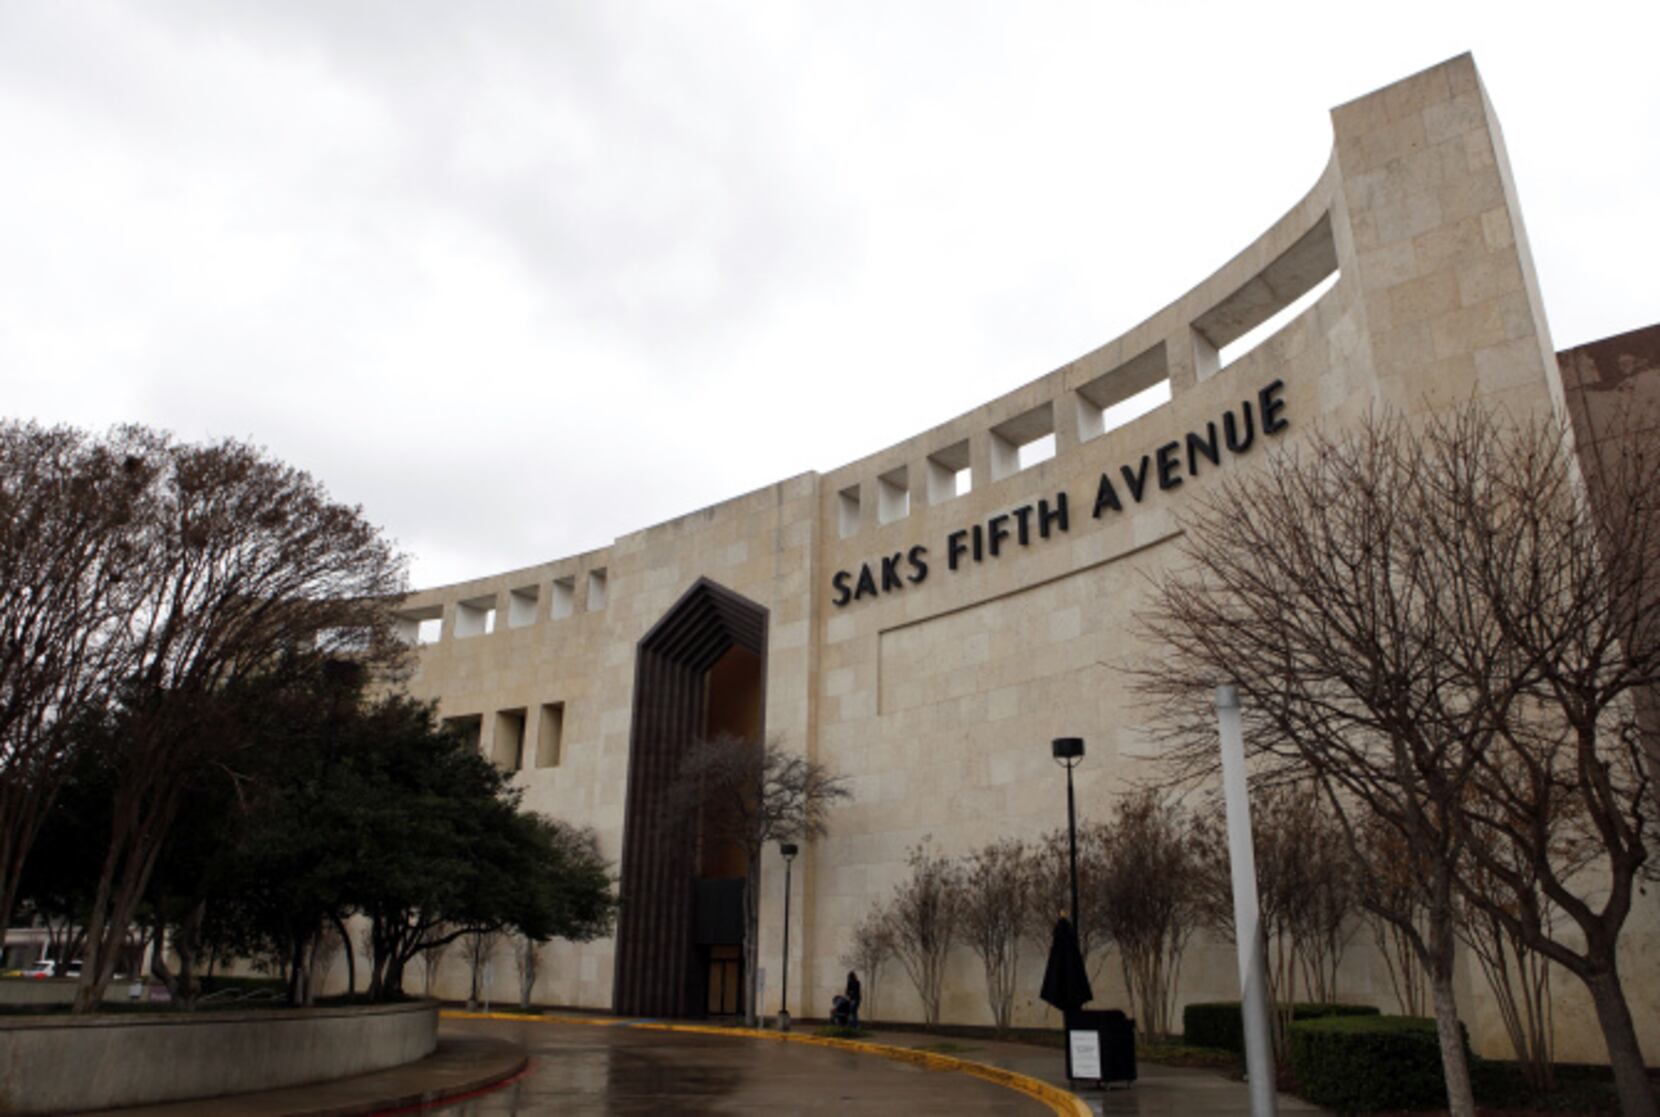 An entrance to Saks Fifth Avenue at the Galleria Tuesday, July 30